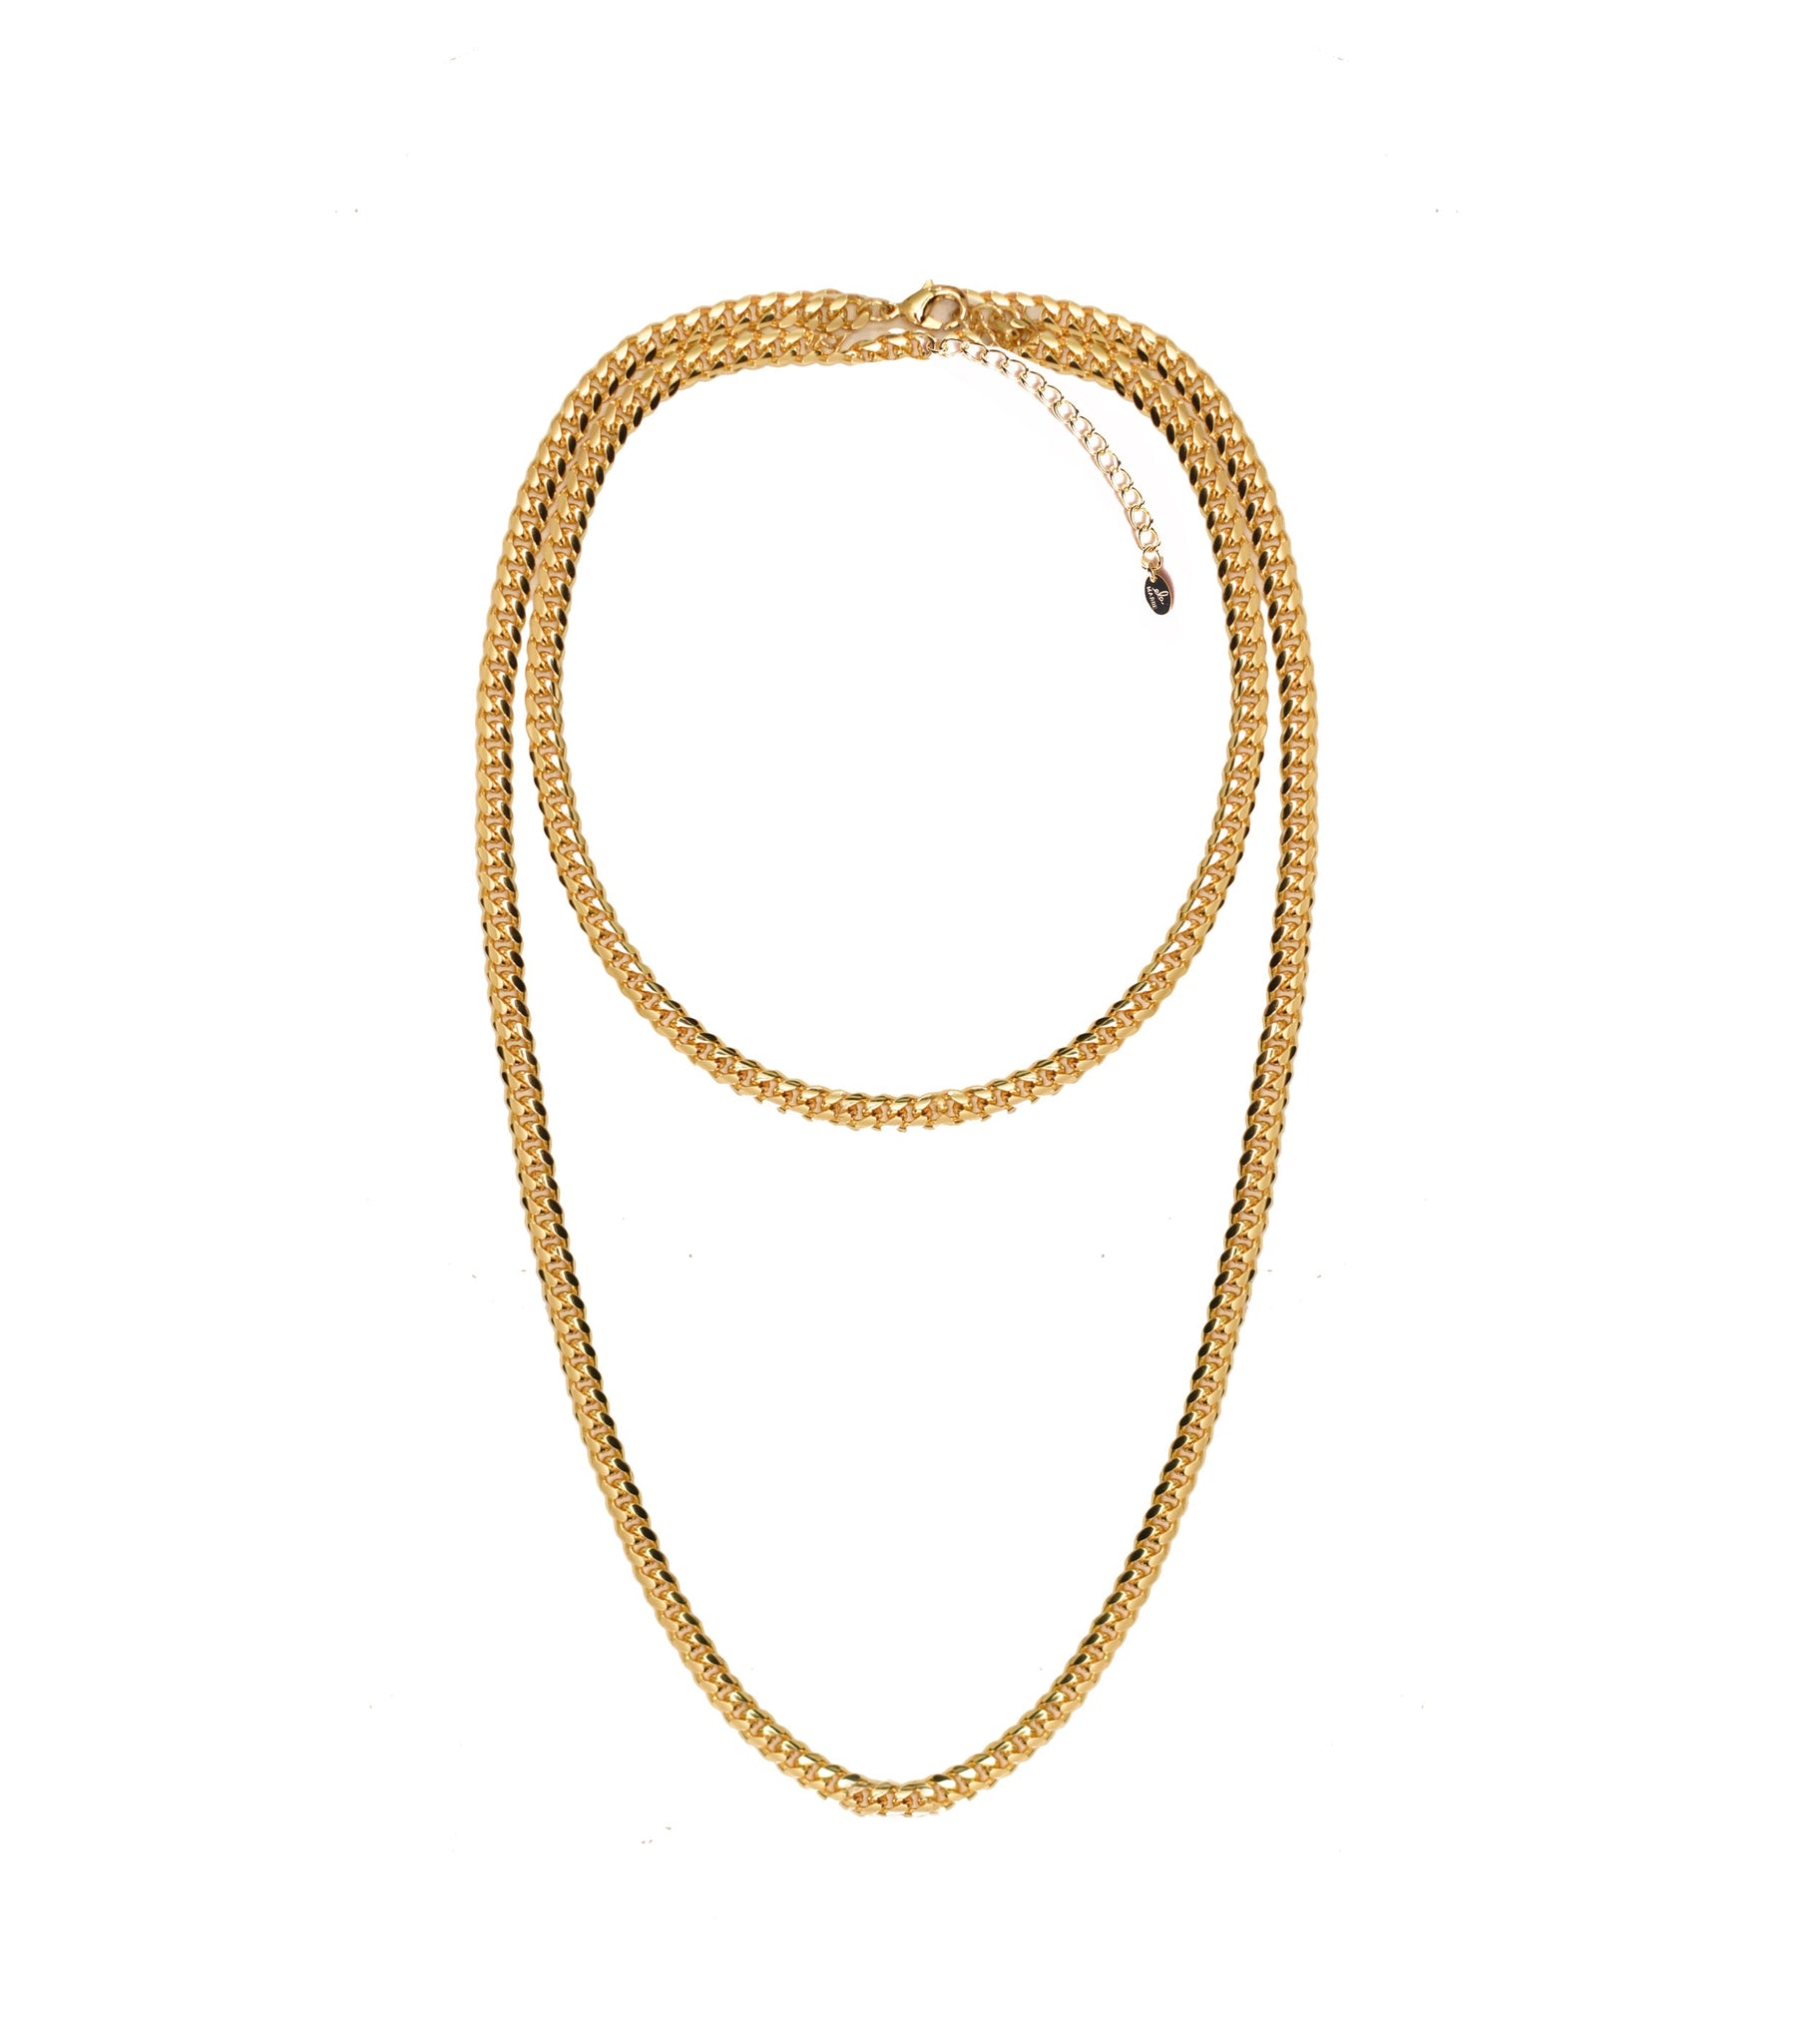 14k Gold Curb Chain Necklace